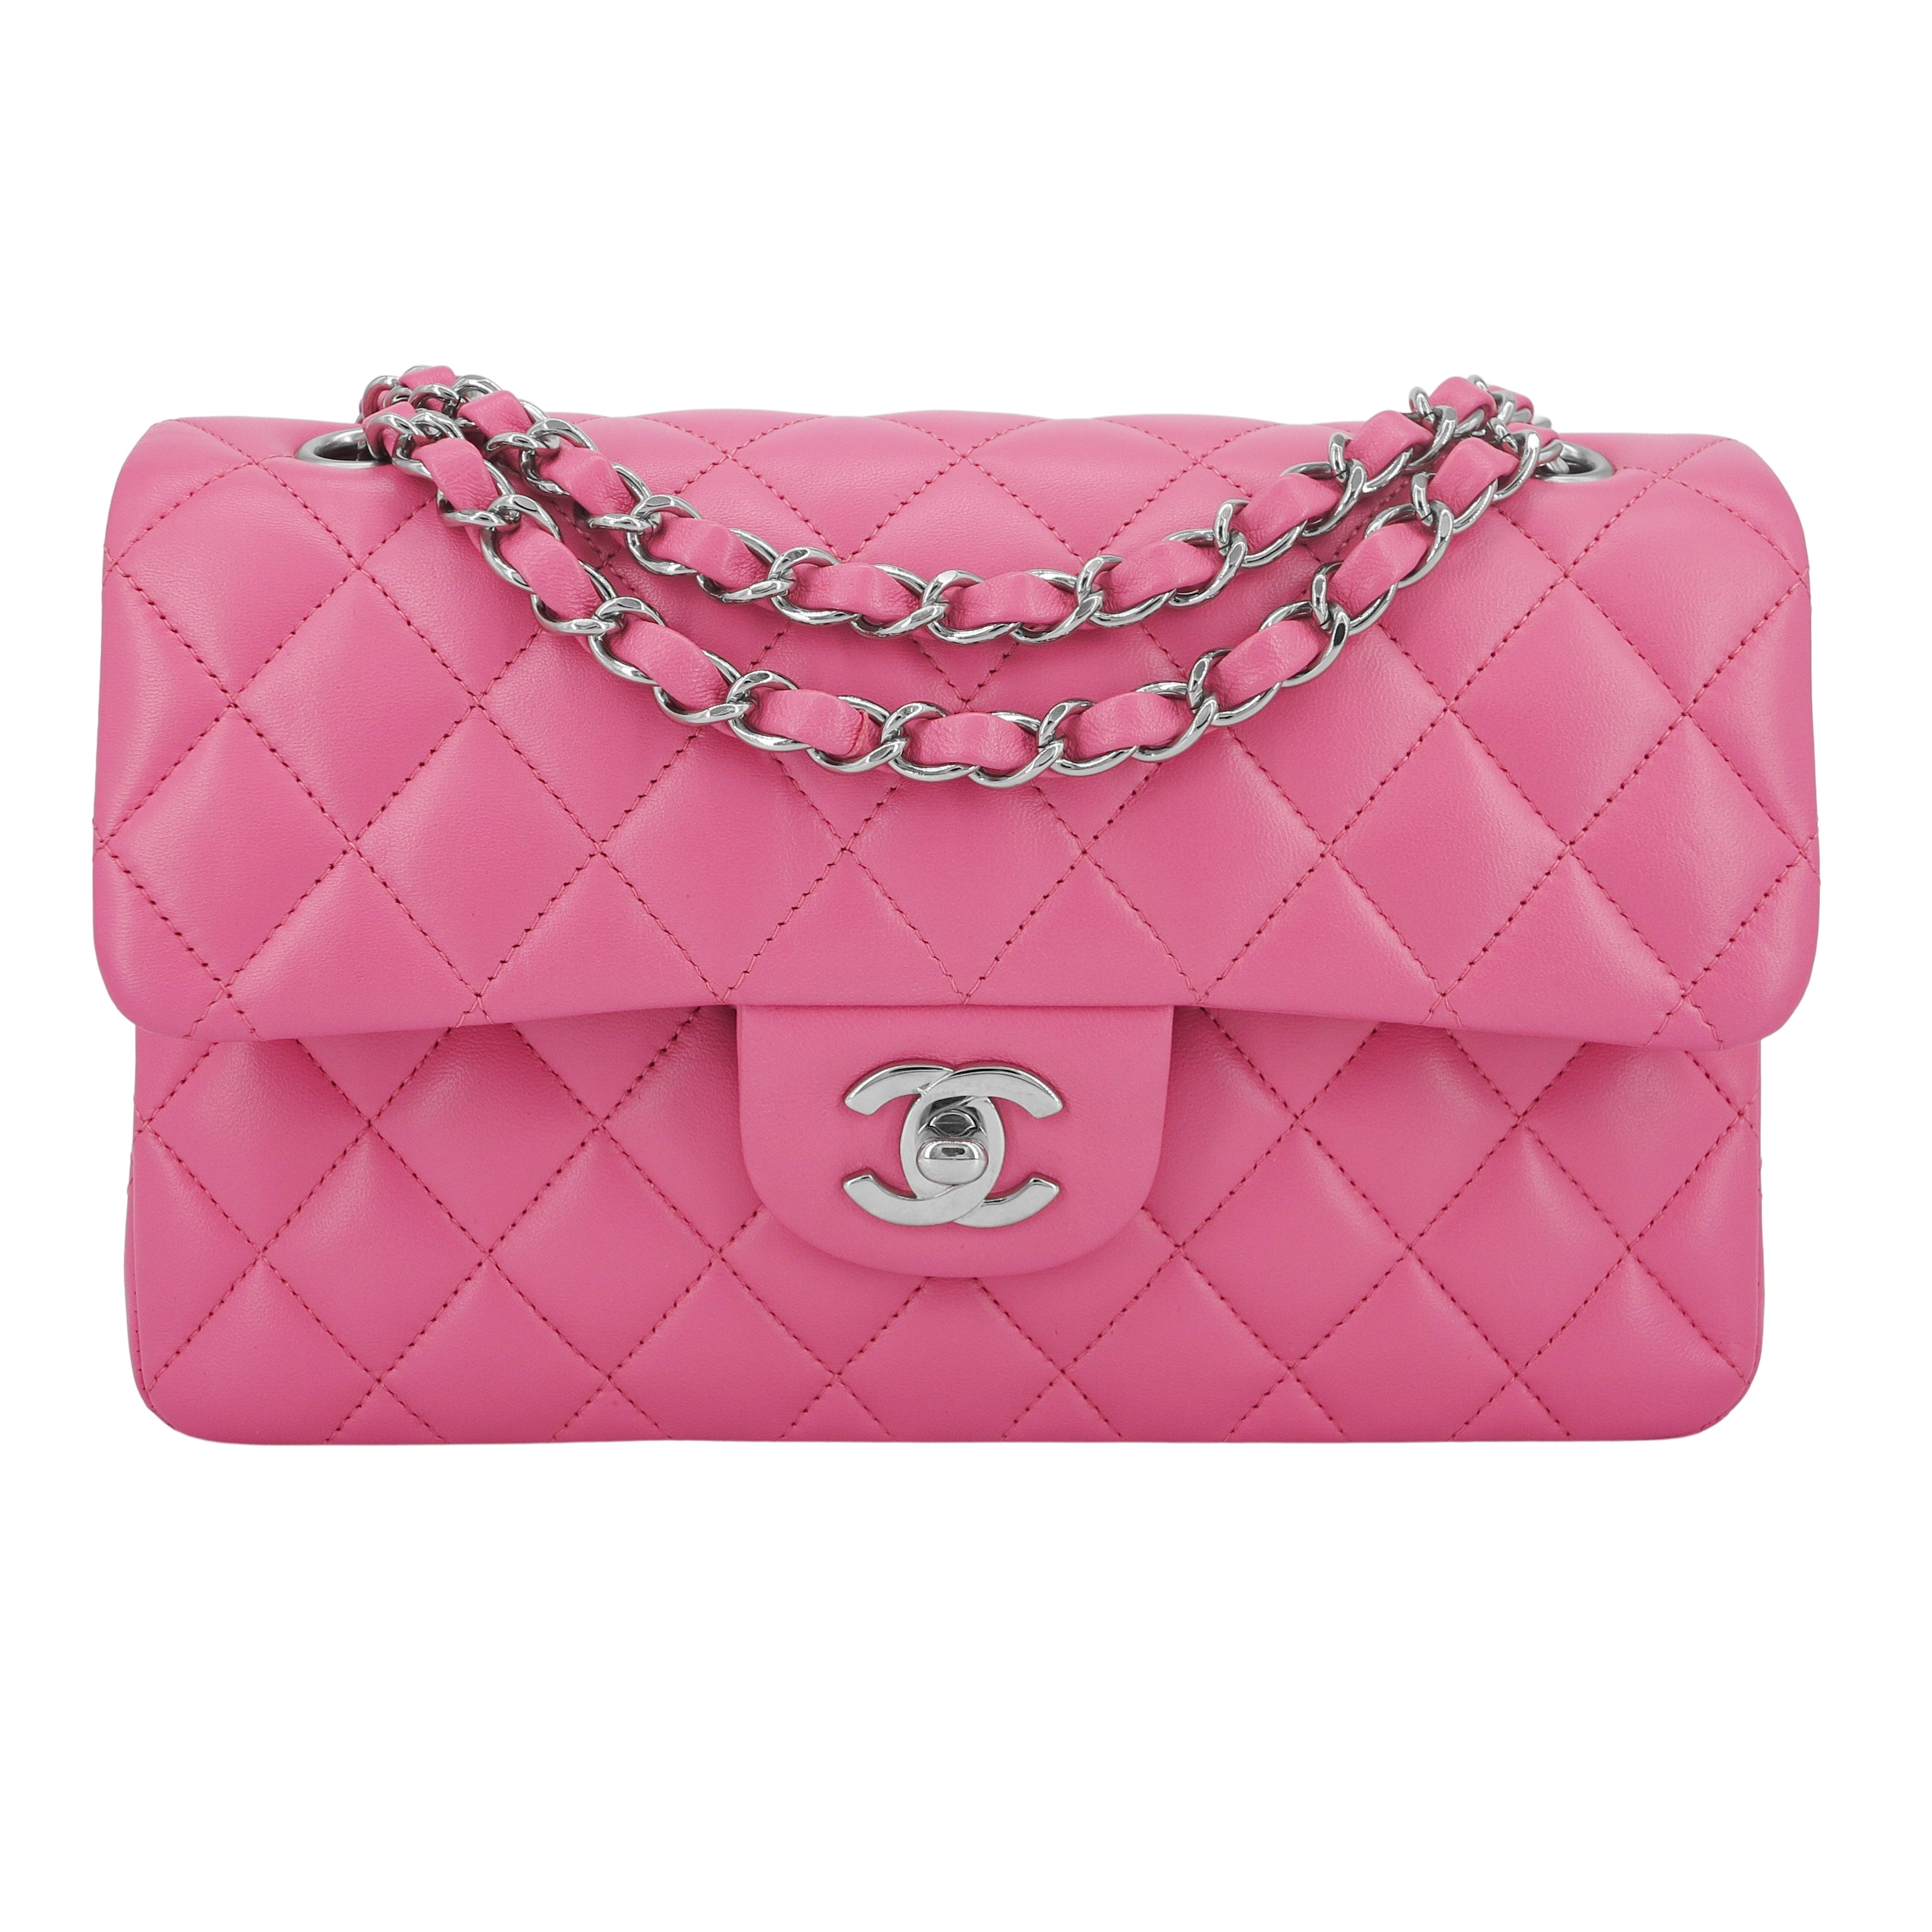 Chanel Mini Flap Bag AS1787 B02916 NR647, Pink, One Size